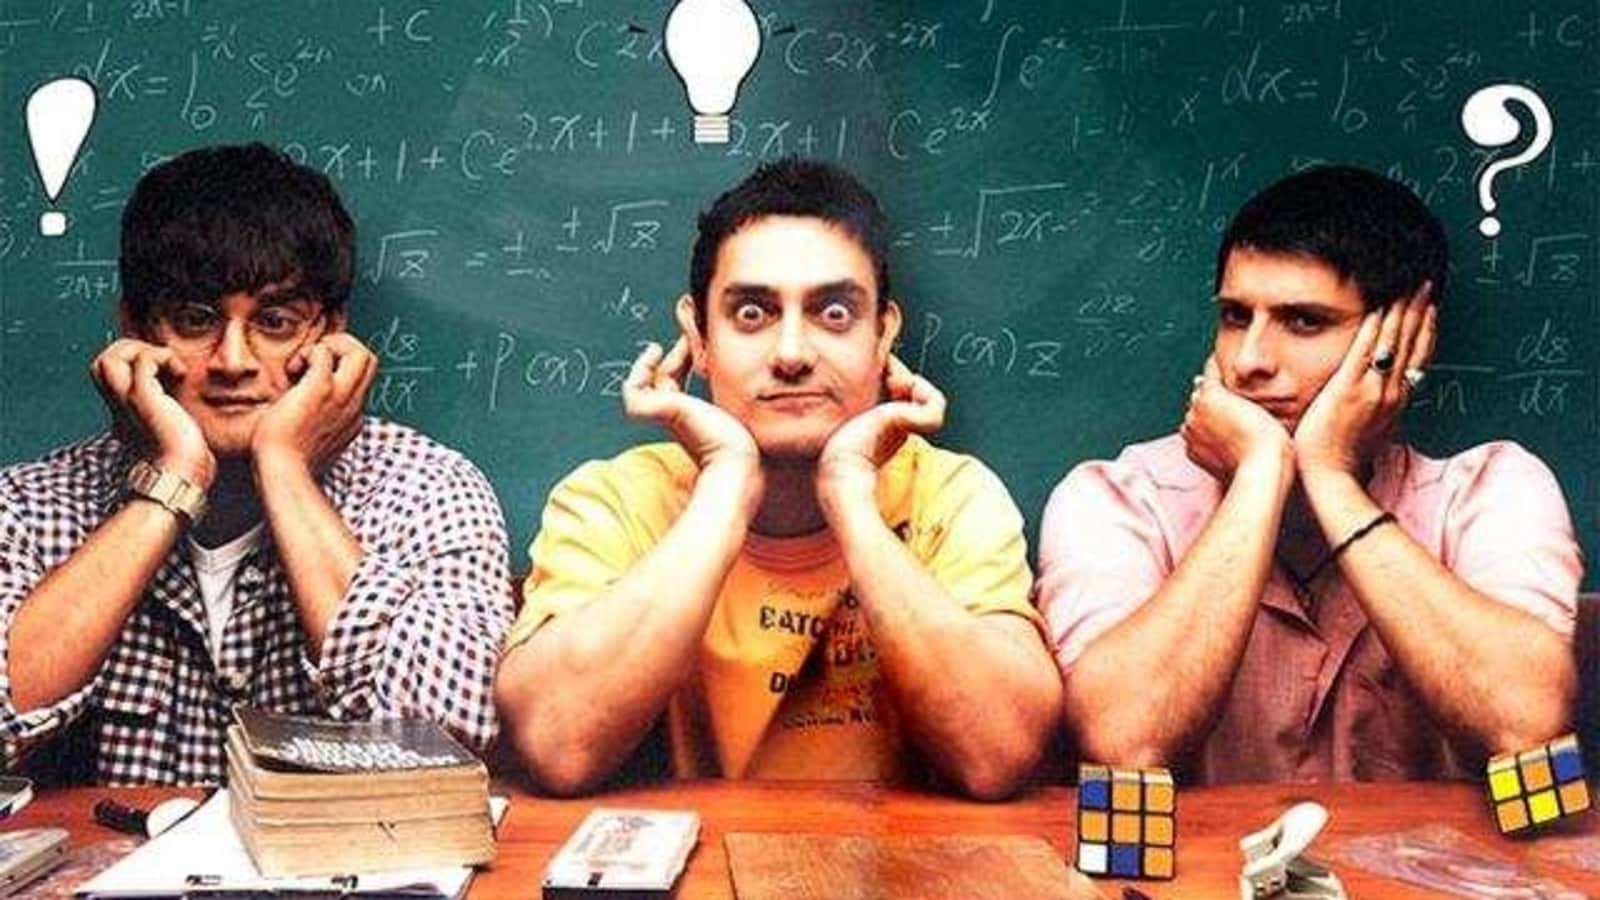 Sharman Joshi reacts to Madhavan’s hilarious post on 3 Idiots about Covid-19 diagnoses: ‘Hope not to join this club’